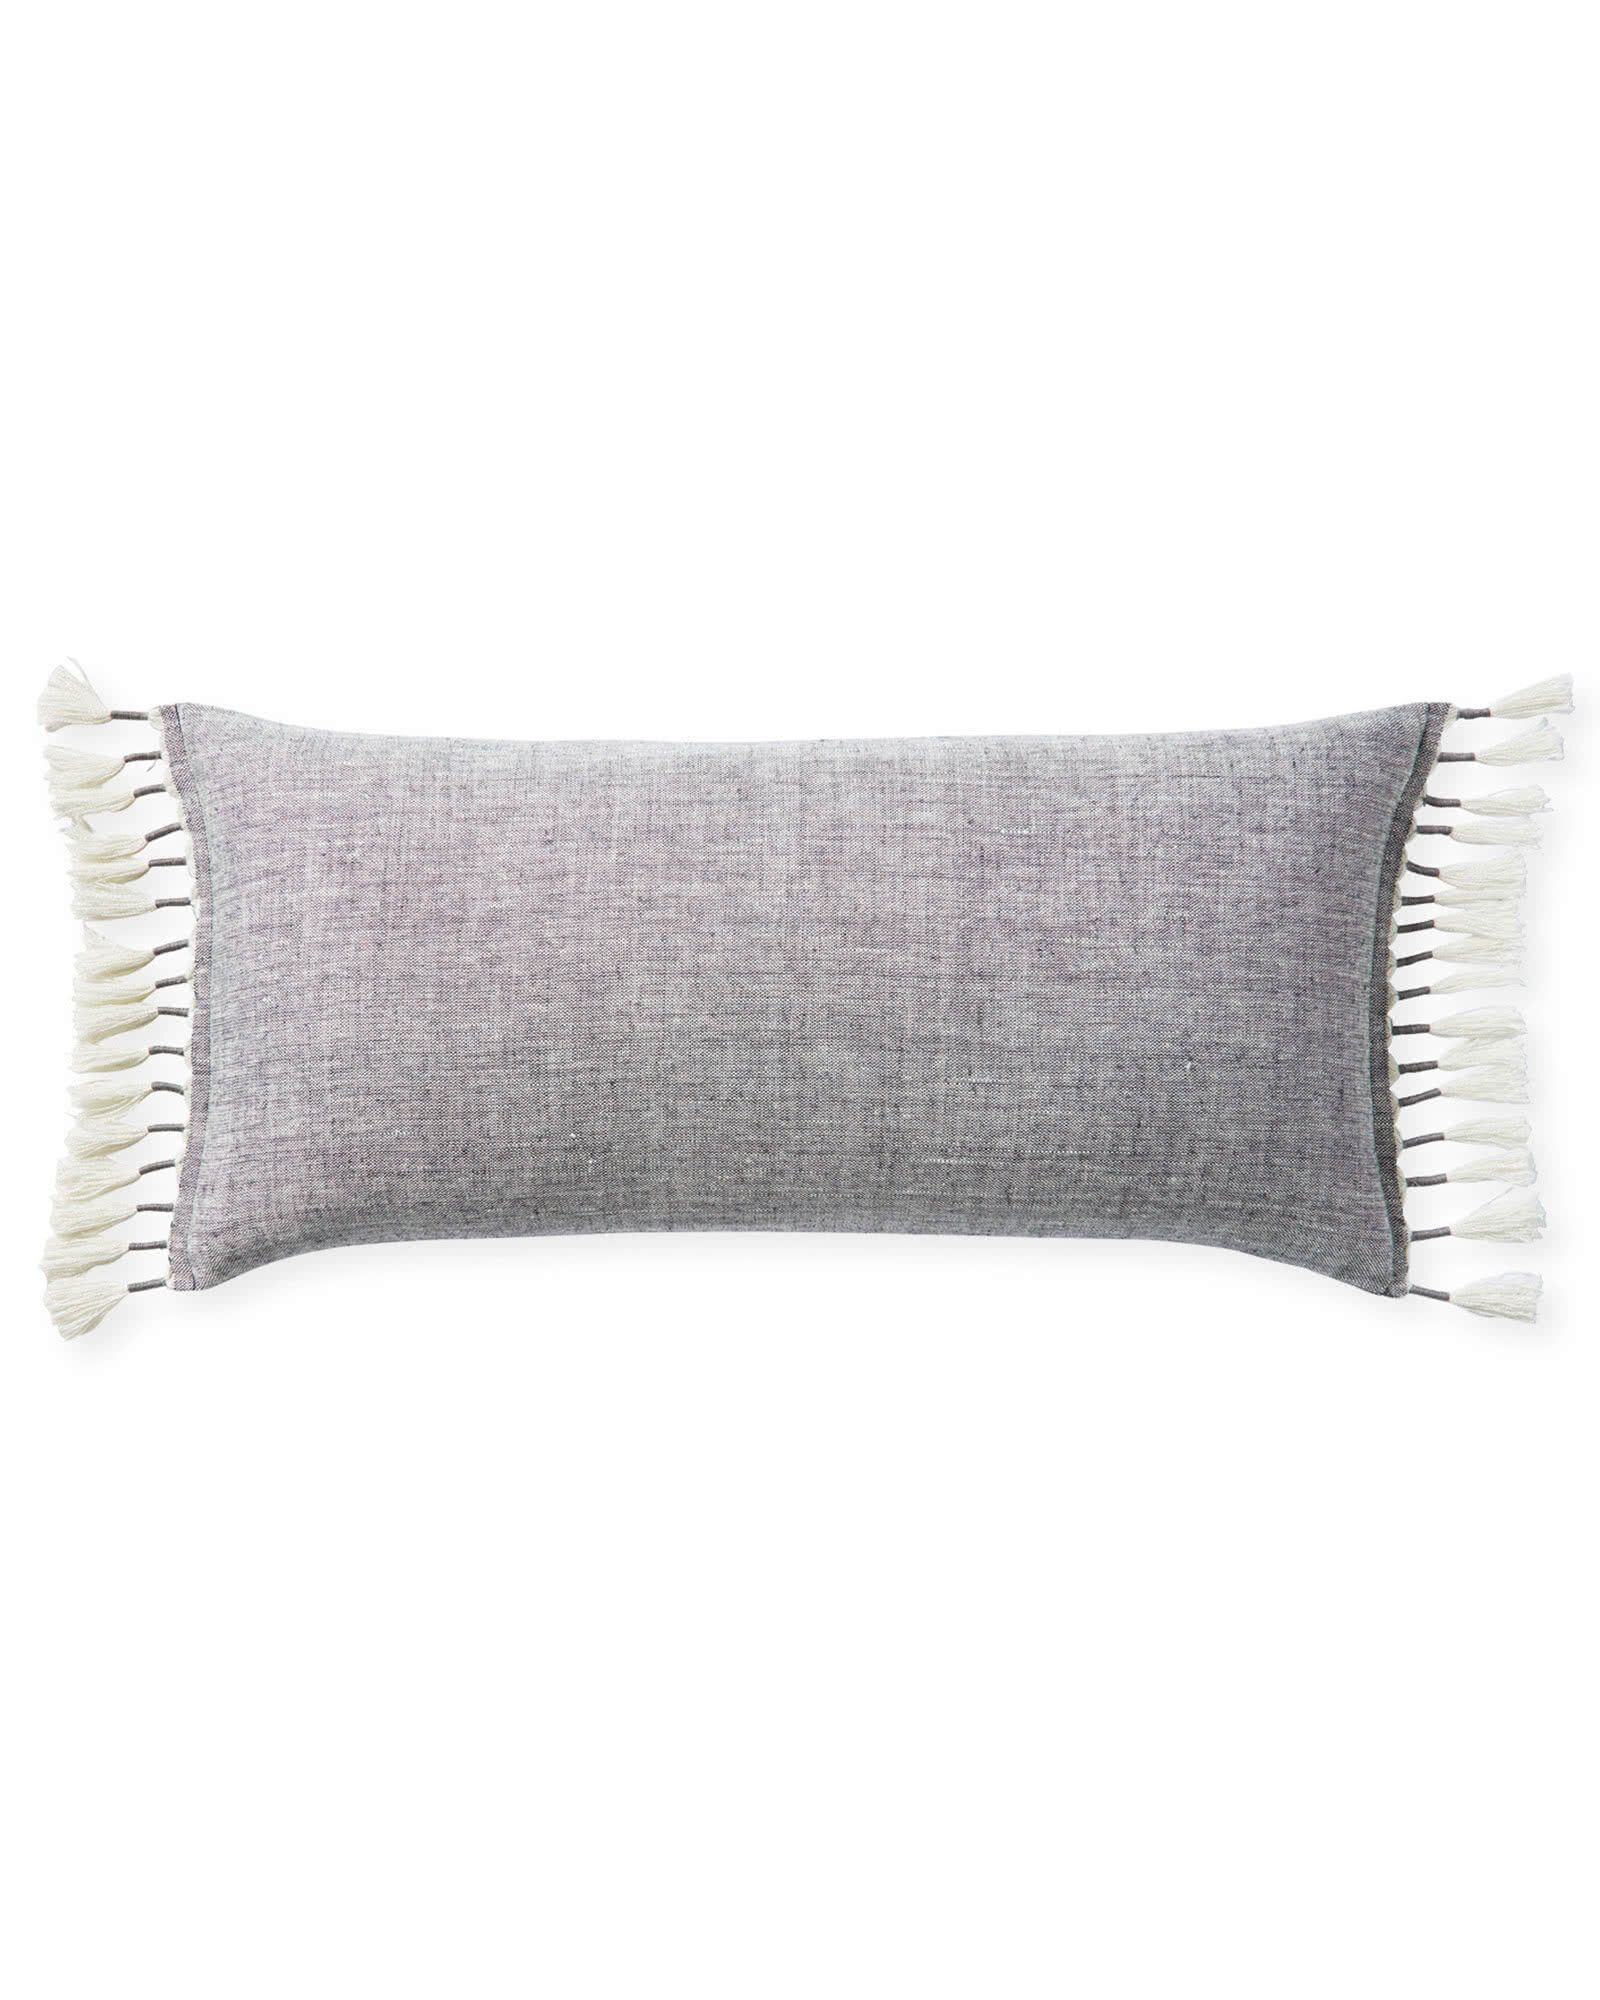 Topanga Pillow Cover | Serena and Lily